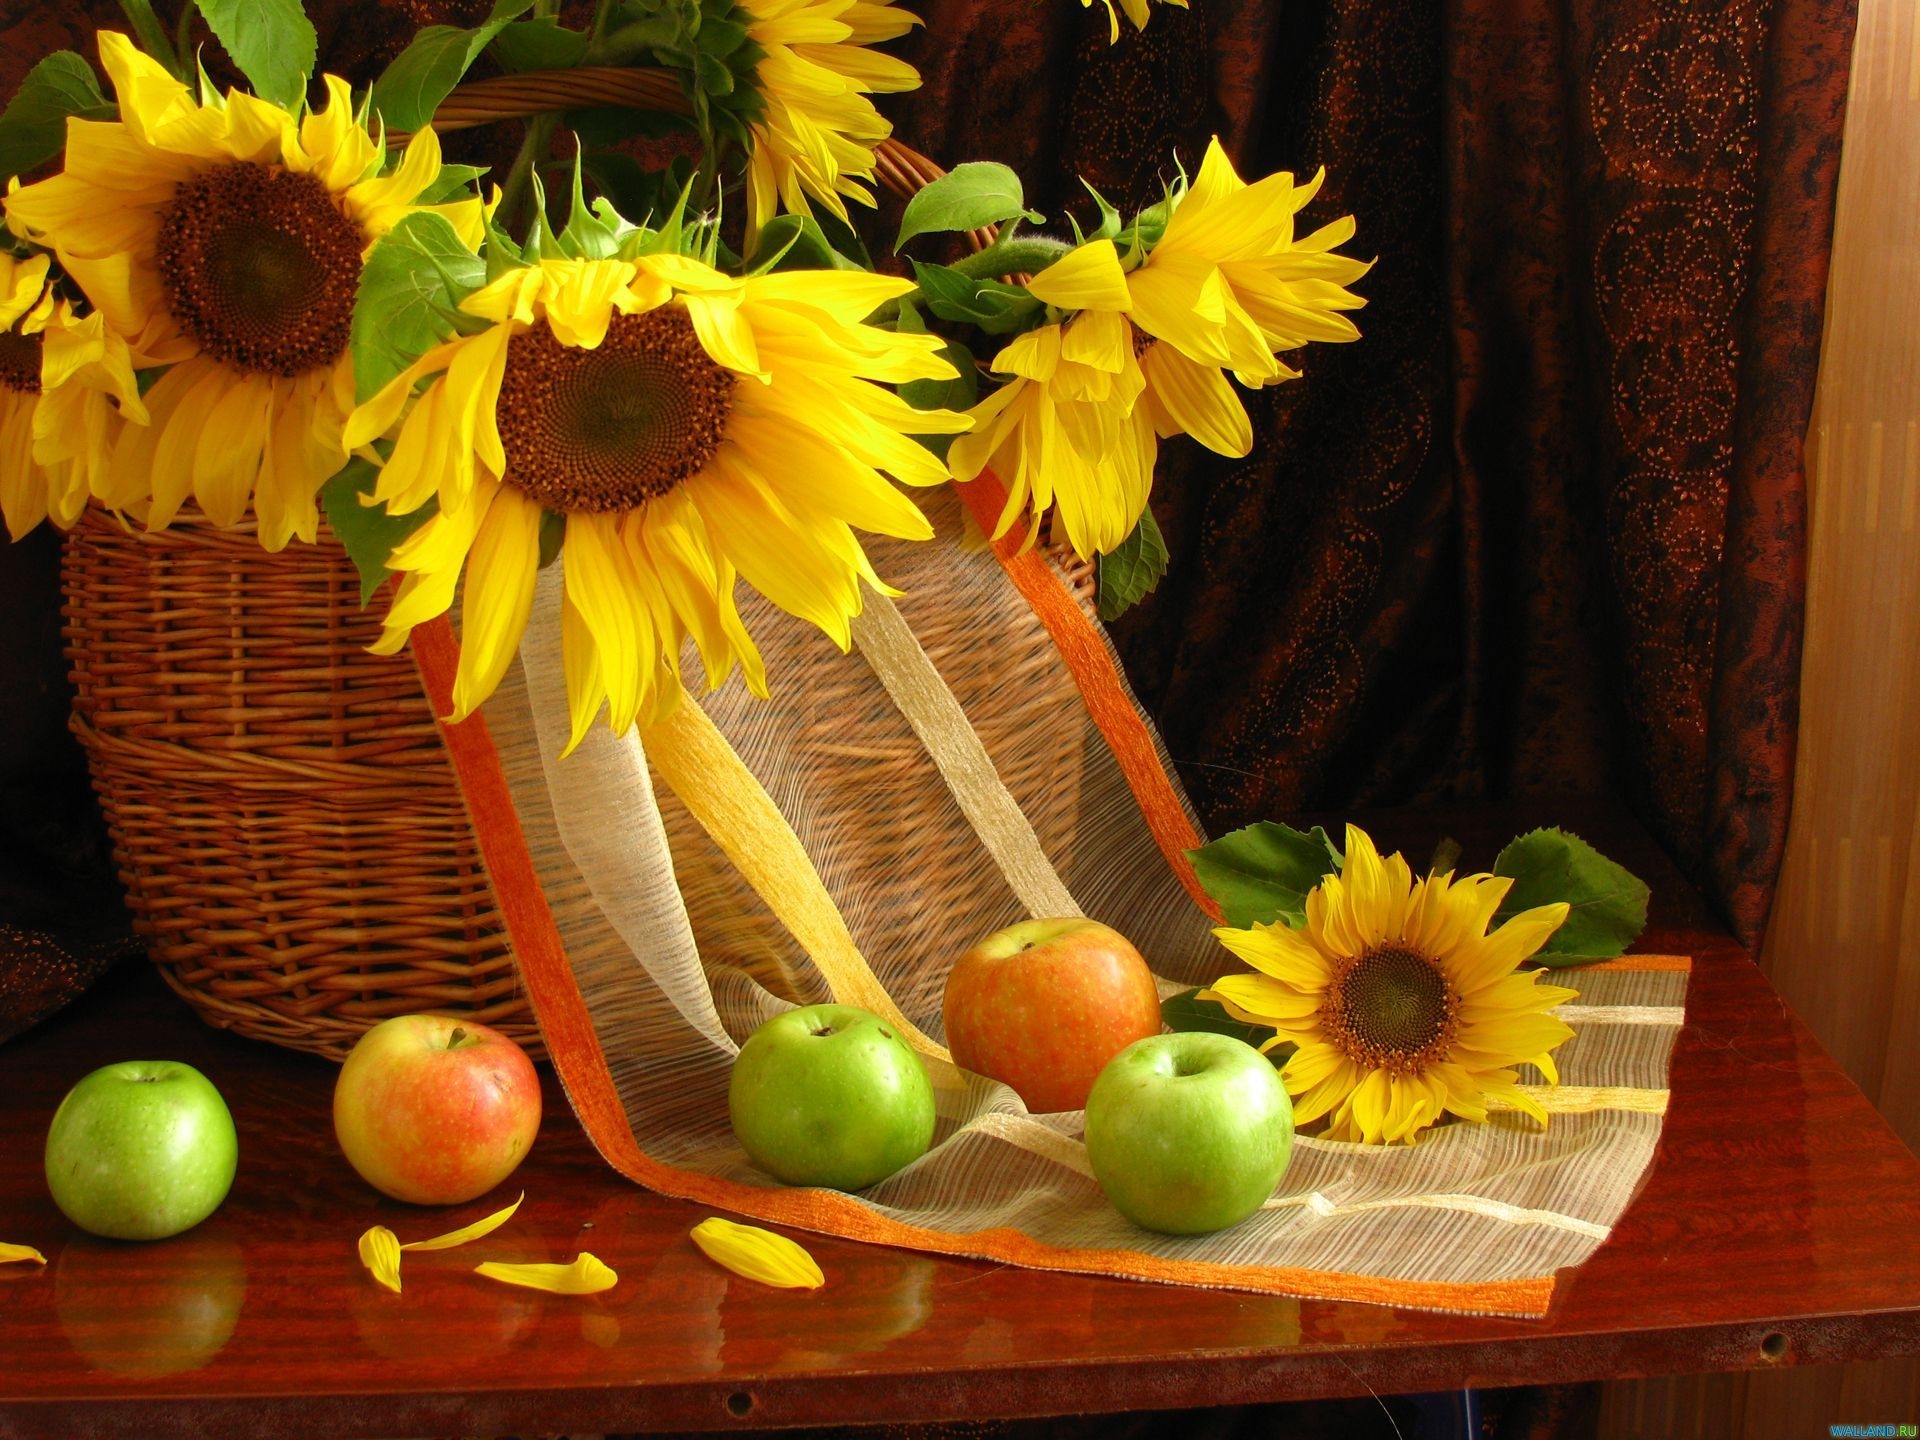 104848 download wallpaper sunflowers, flowers, leaves, apples, still life, table, basket, curtains screensavers and pictures for free